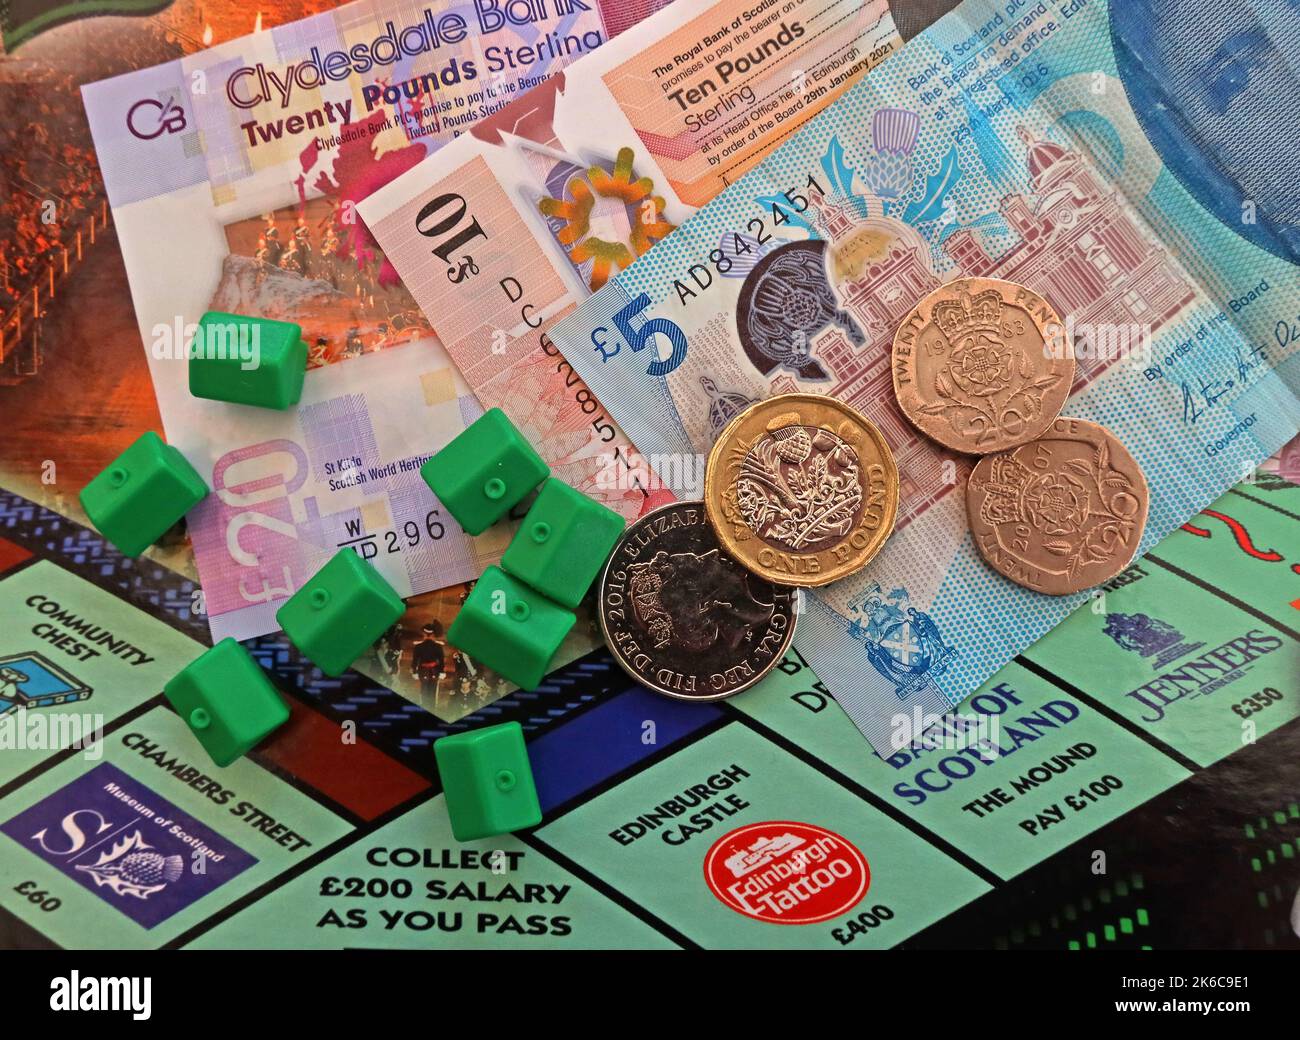 Property ownership in Scotland, Scottish sterling cash notes on Edinburgh Monopoly board, green houses, representing difficulty buying or renting Stock Photo